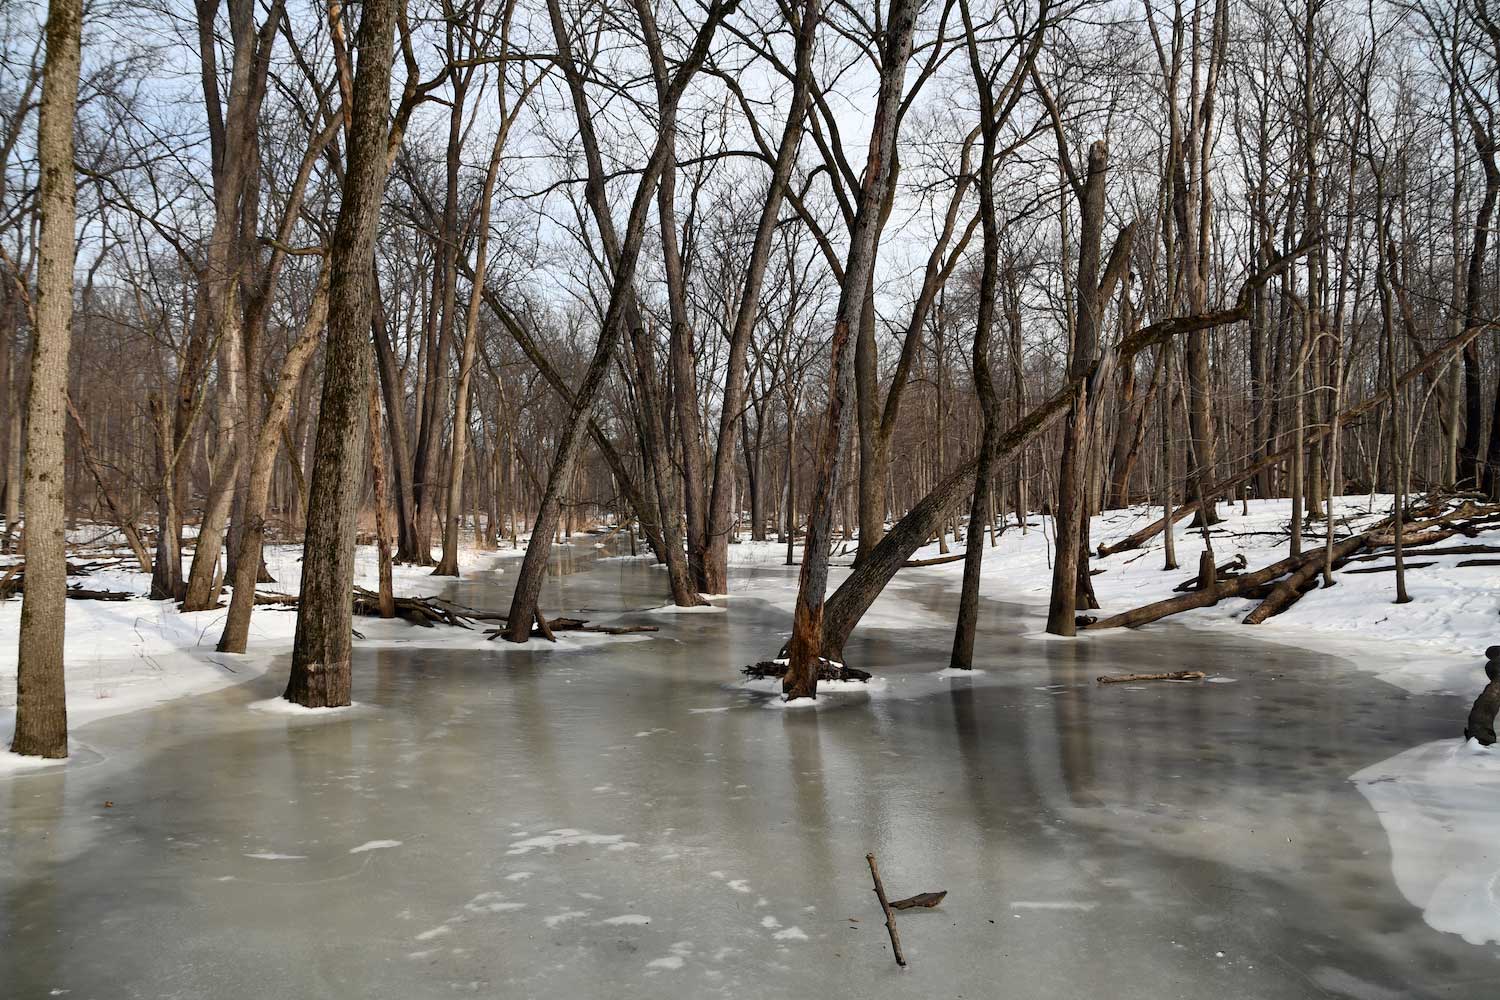 A frozen creek with trees growing in it.